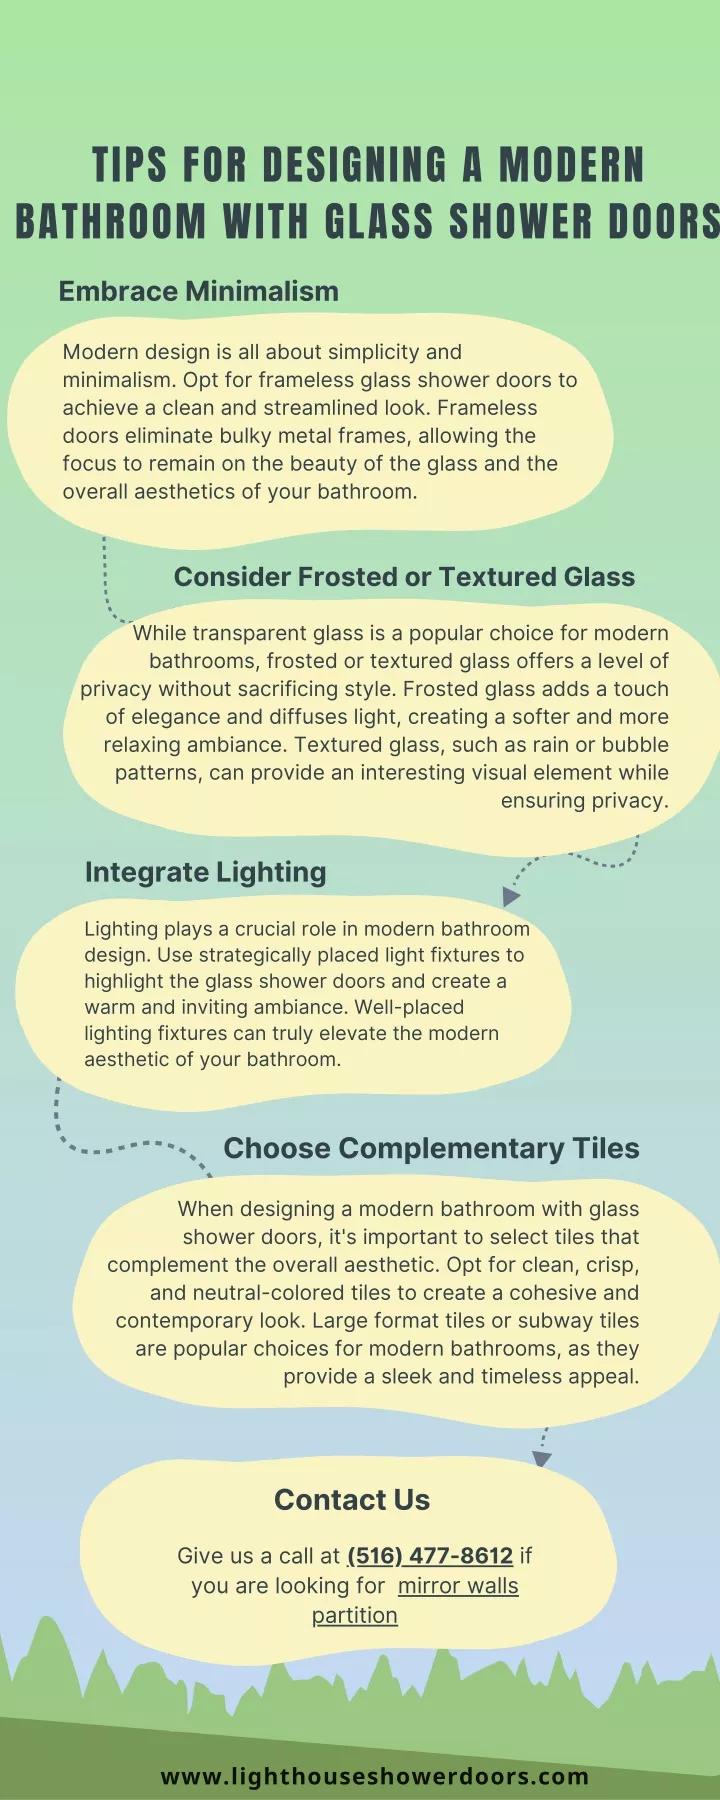 tips for designing a modern bathroom with glass